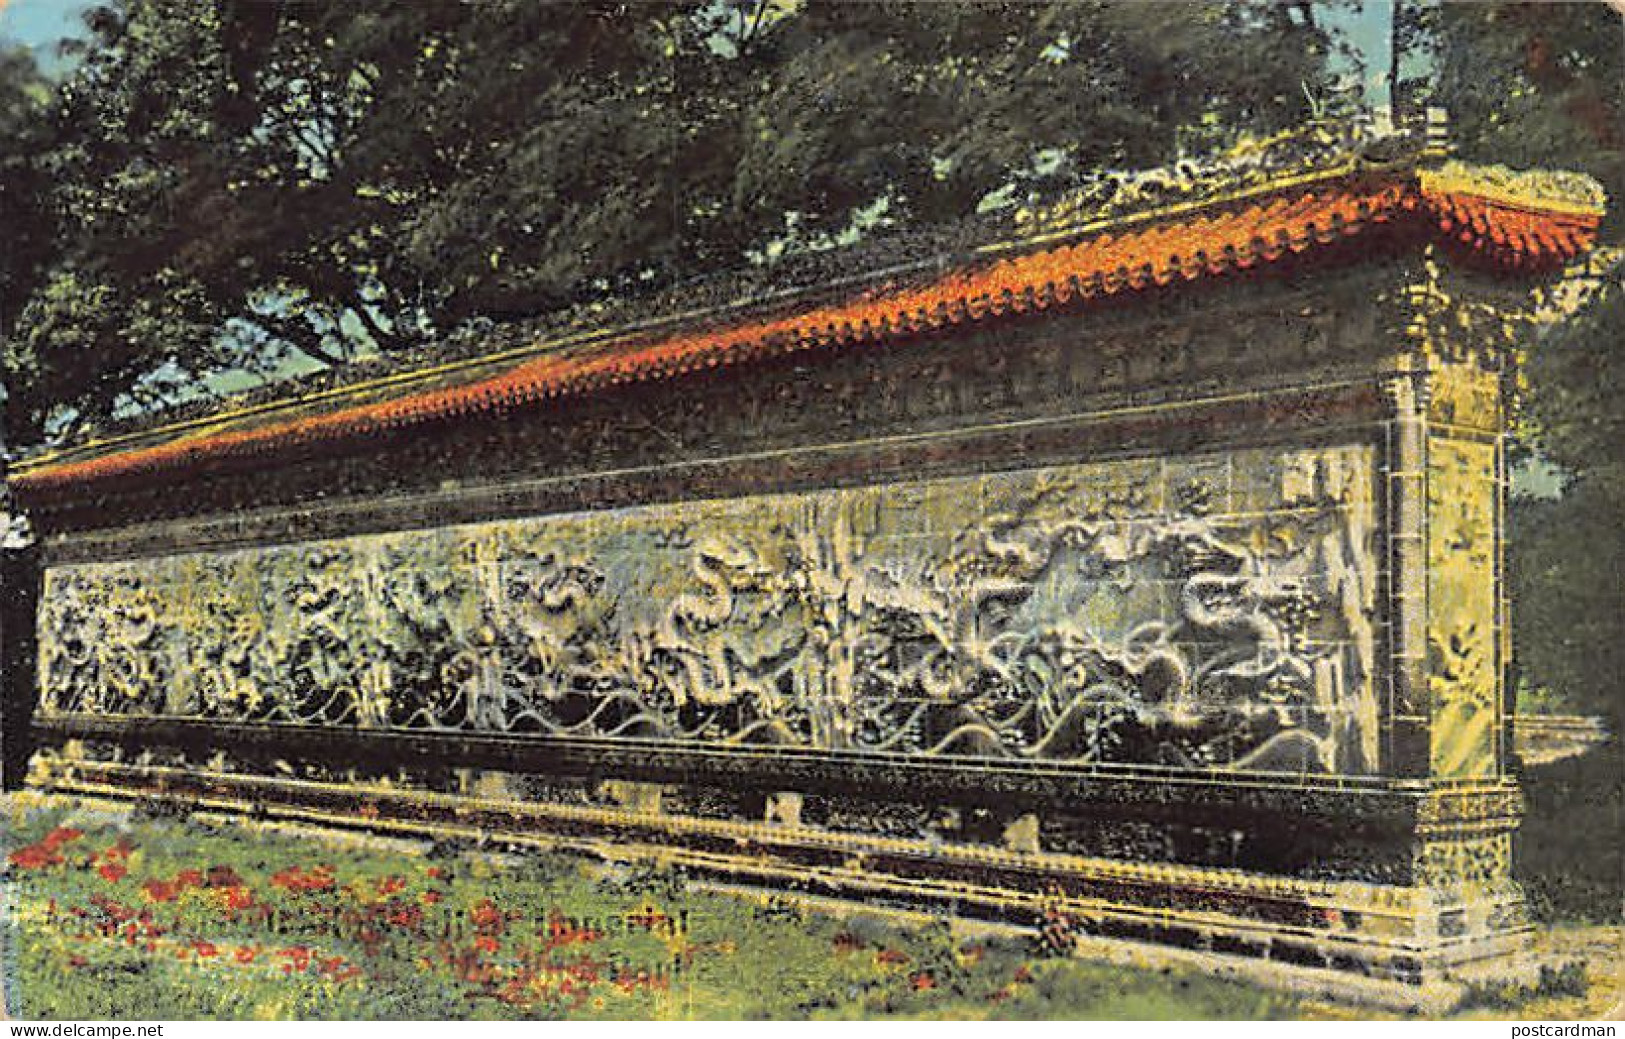 China - BEIJING - Glazed Tile Wall In The Imperial Hunting Park - Publ. Unknown 13906 - China